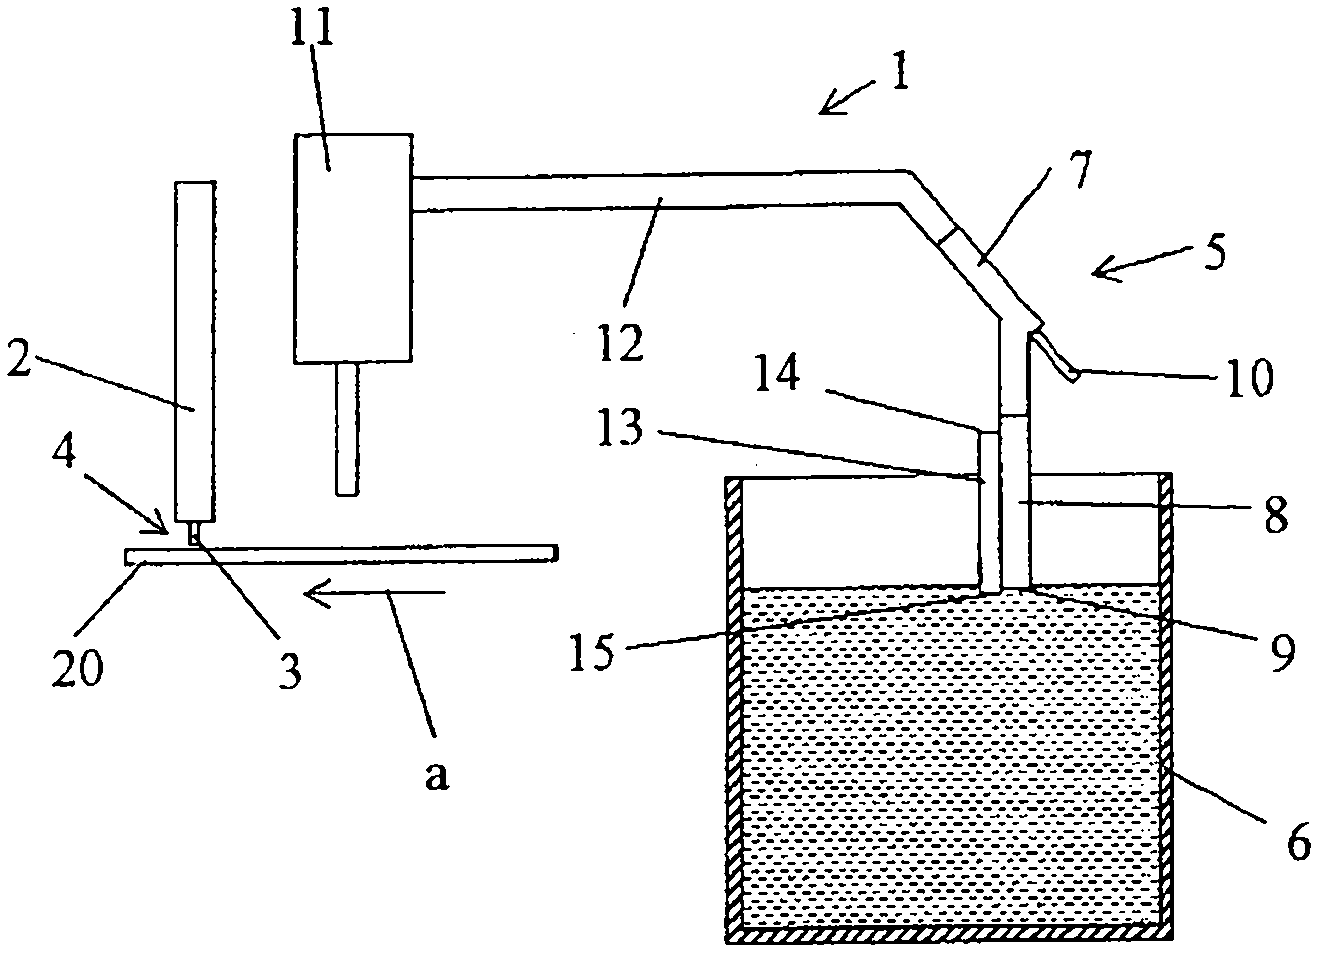 Device for handling powder for a welding appatarus